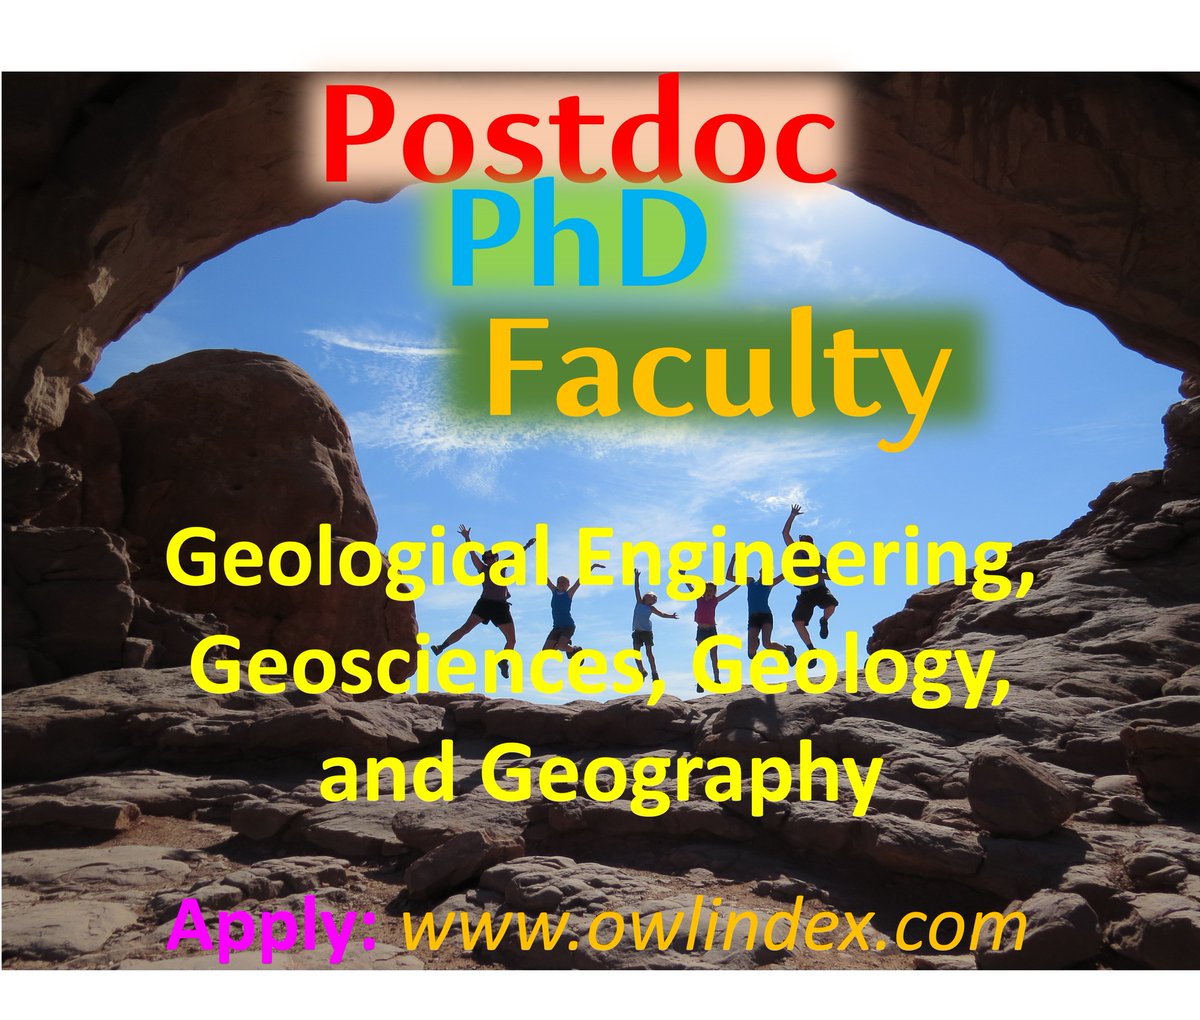 PhD, Postdoc, and Faculty/Lecturer positions:
owlindex.com/oi/DkLnnq9i

#owlindex #PhD #PhDposition #phdresearch #phdjobs #master #Research #researchers #Faculty #Assistant #Associate #FullProfessor #positions #facultyjobs #lecturer #geology #Geographical #geography @owlindex